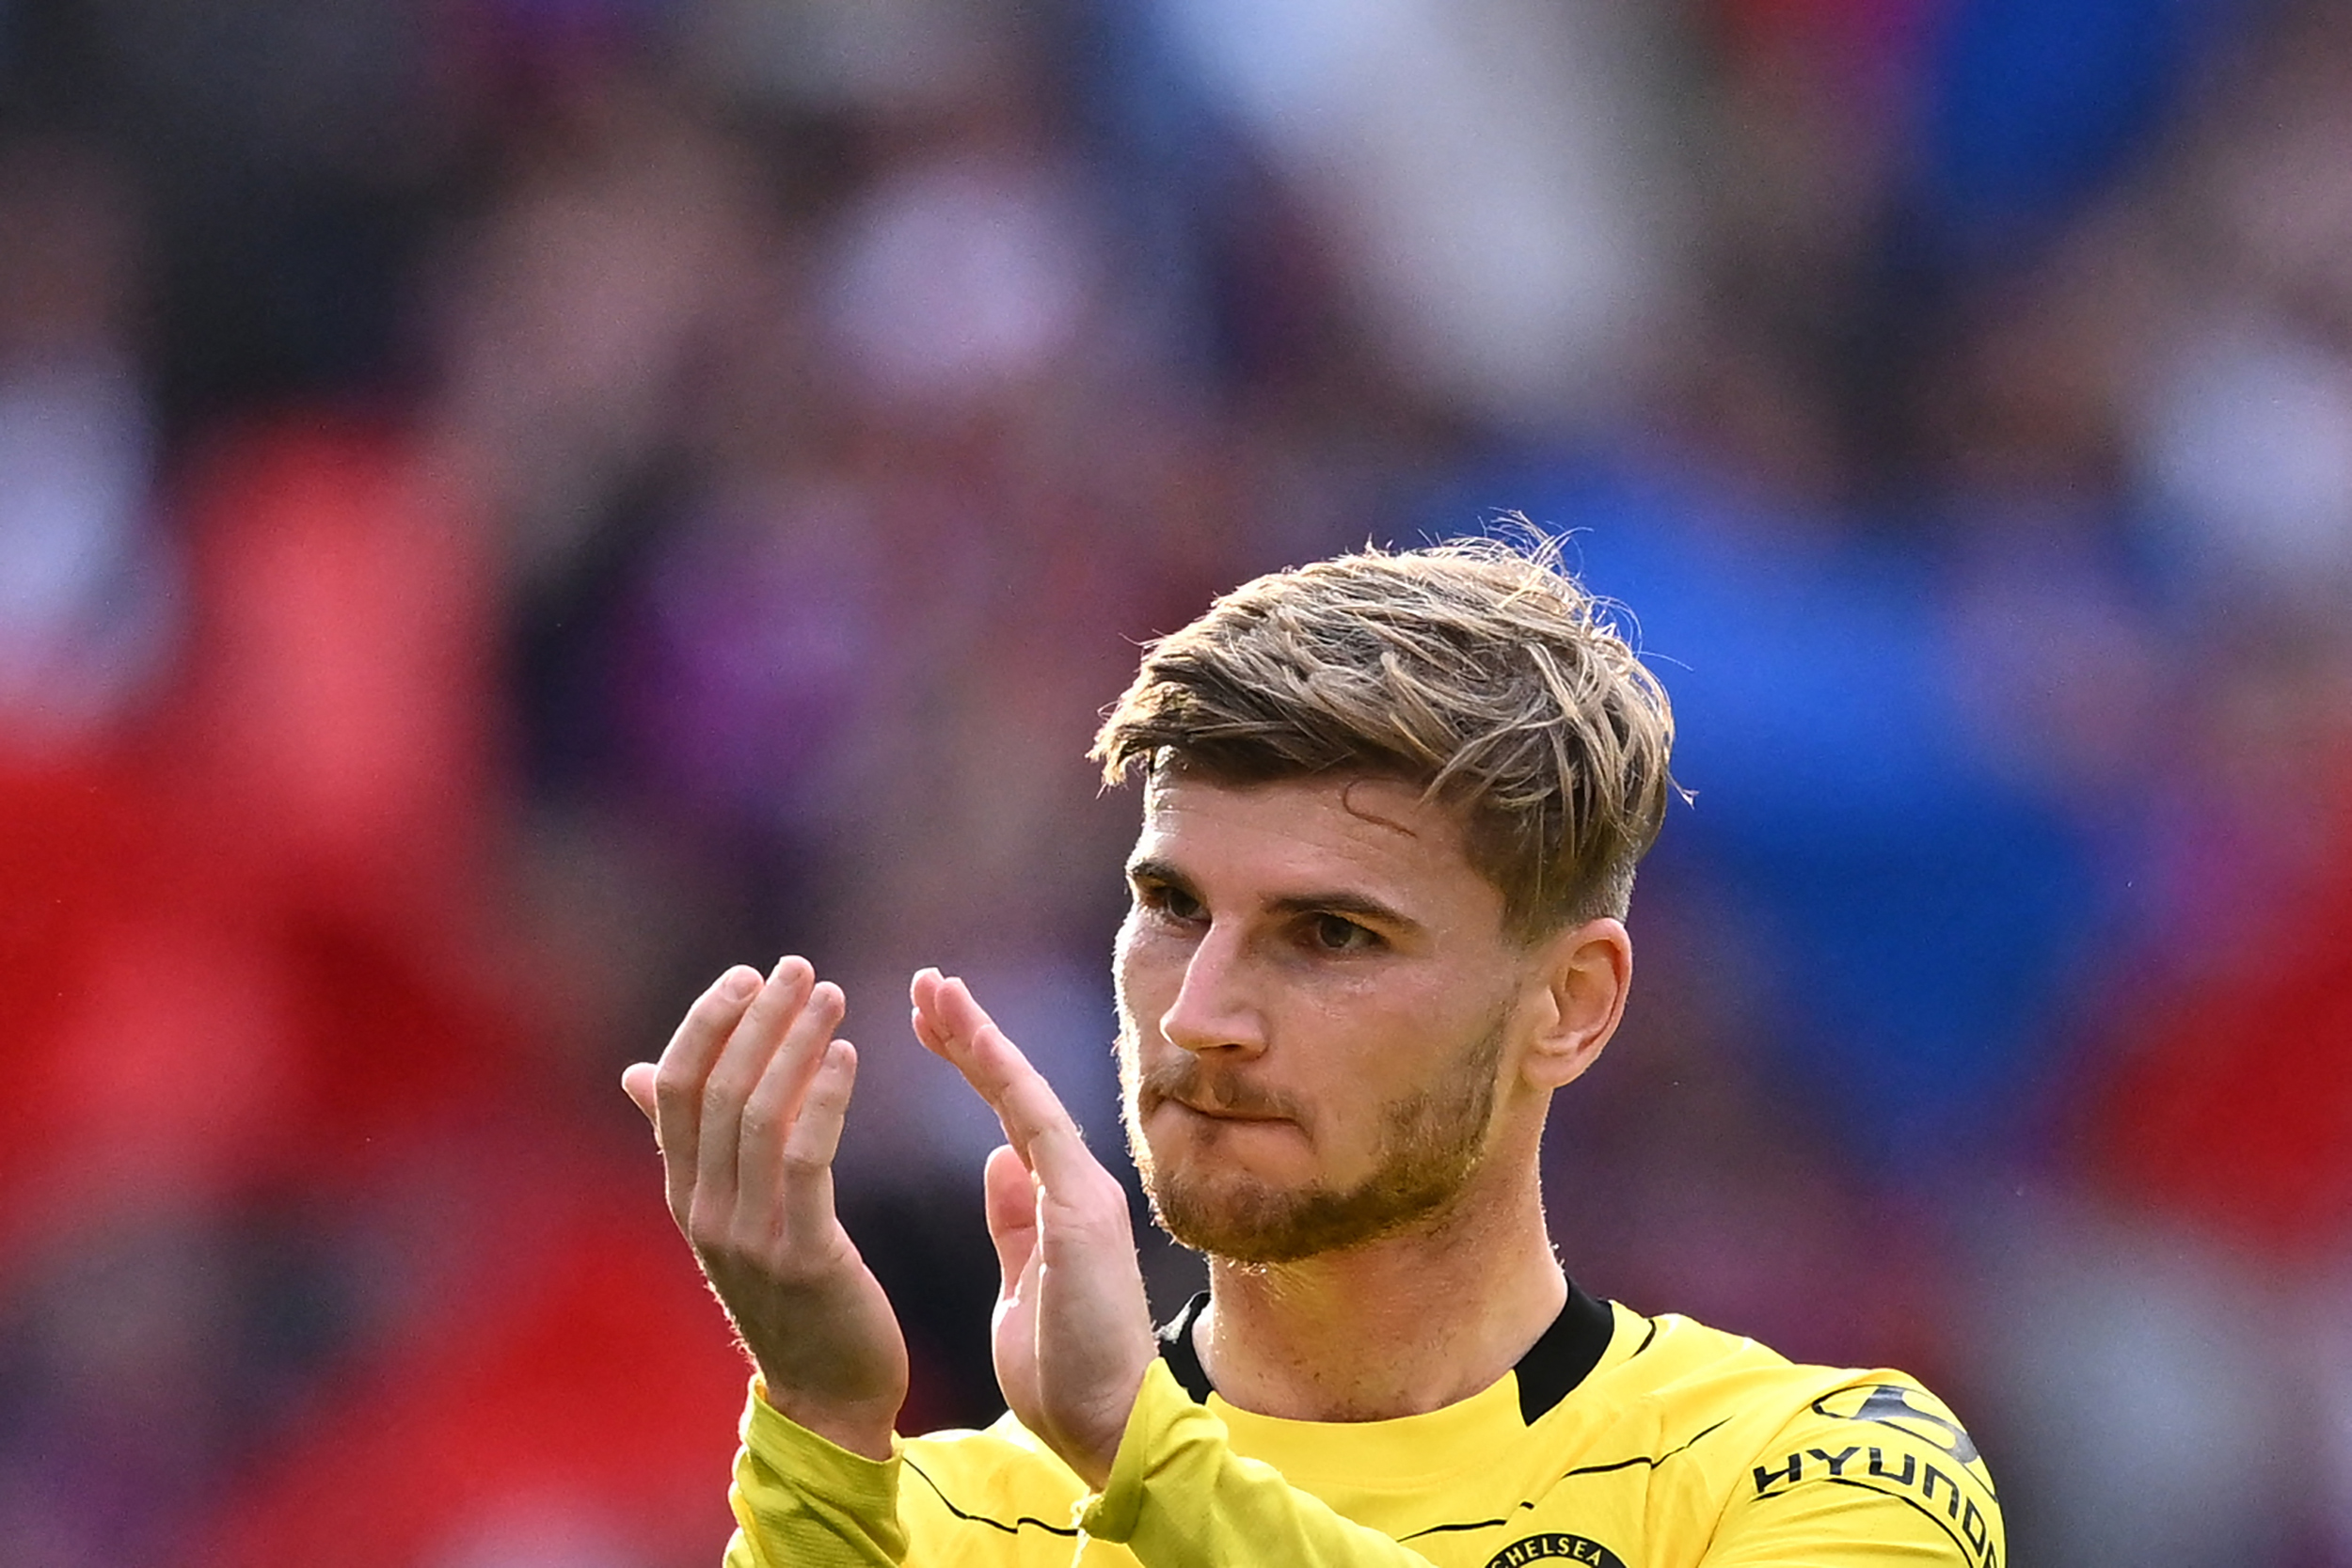 Timo Werner could return to RB Leipzig from Chelsea.